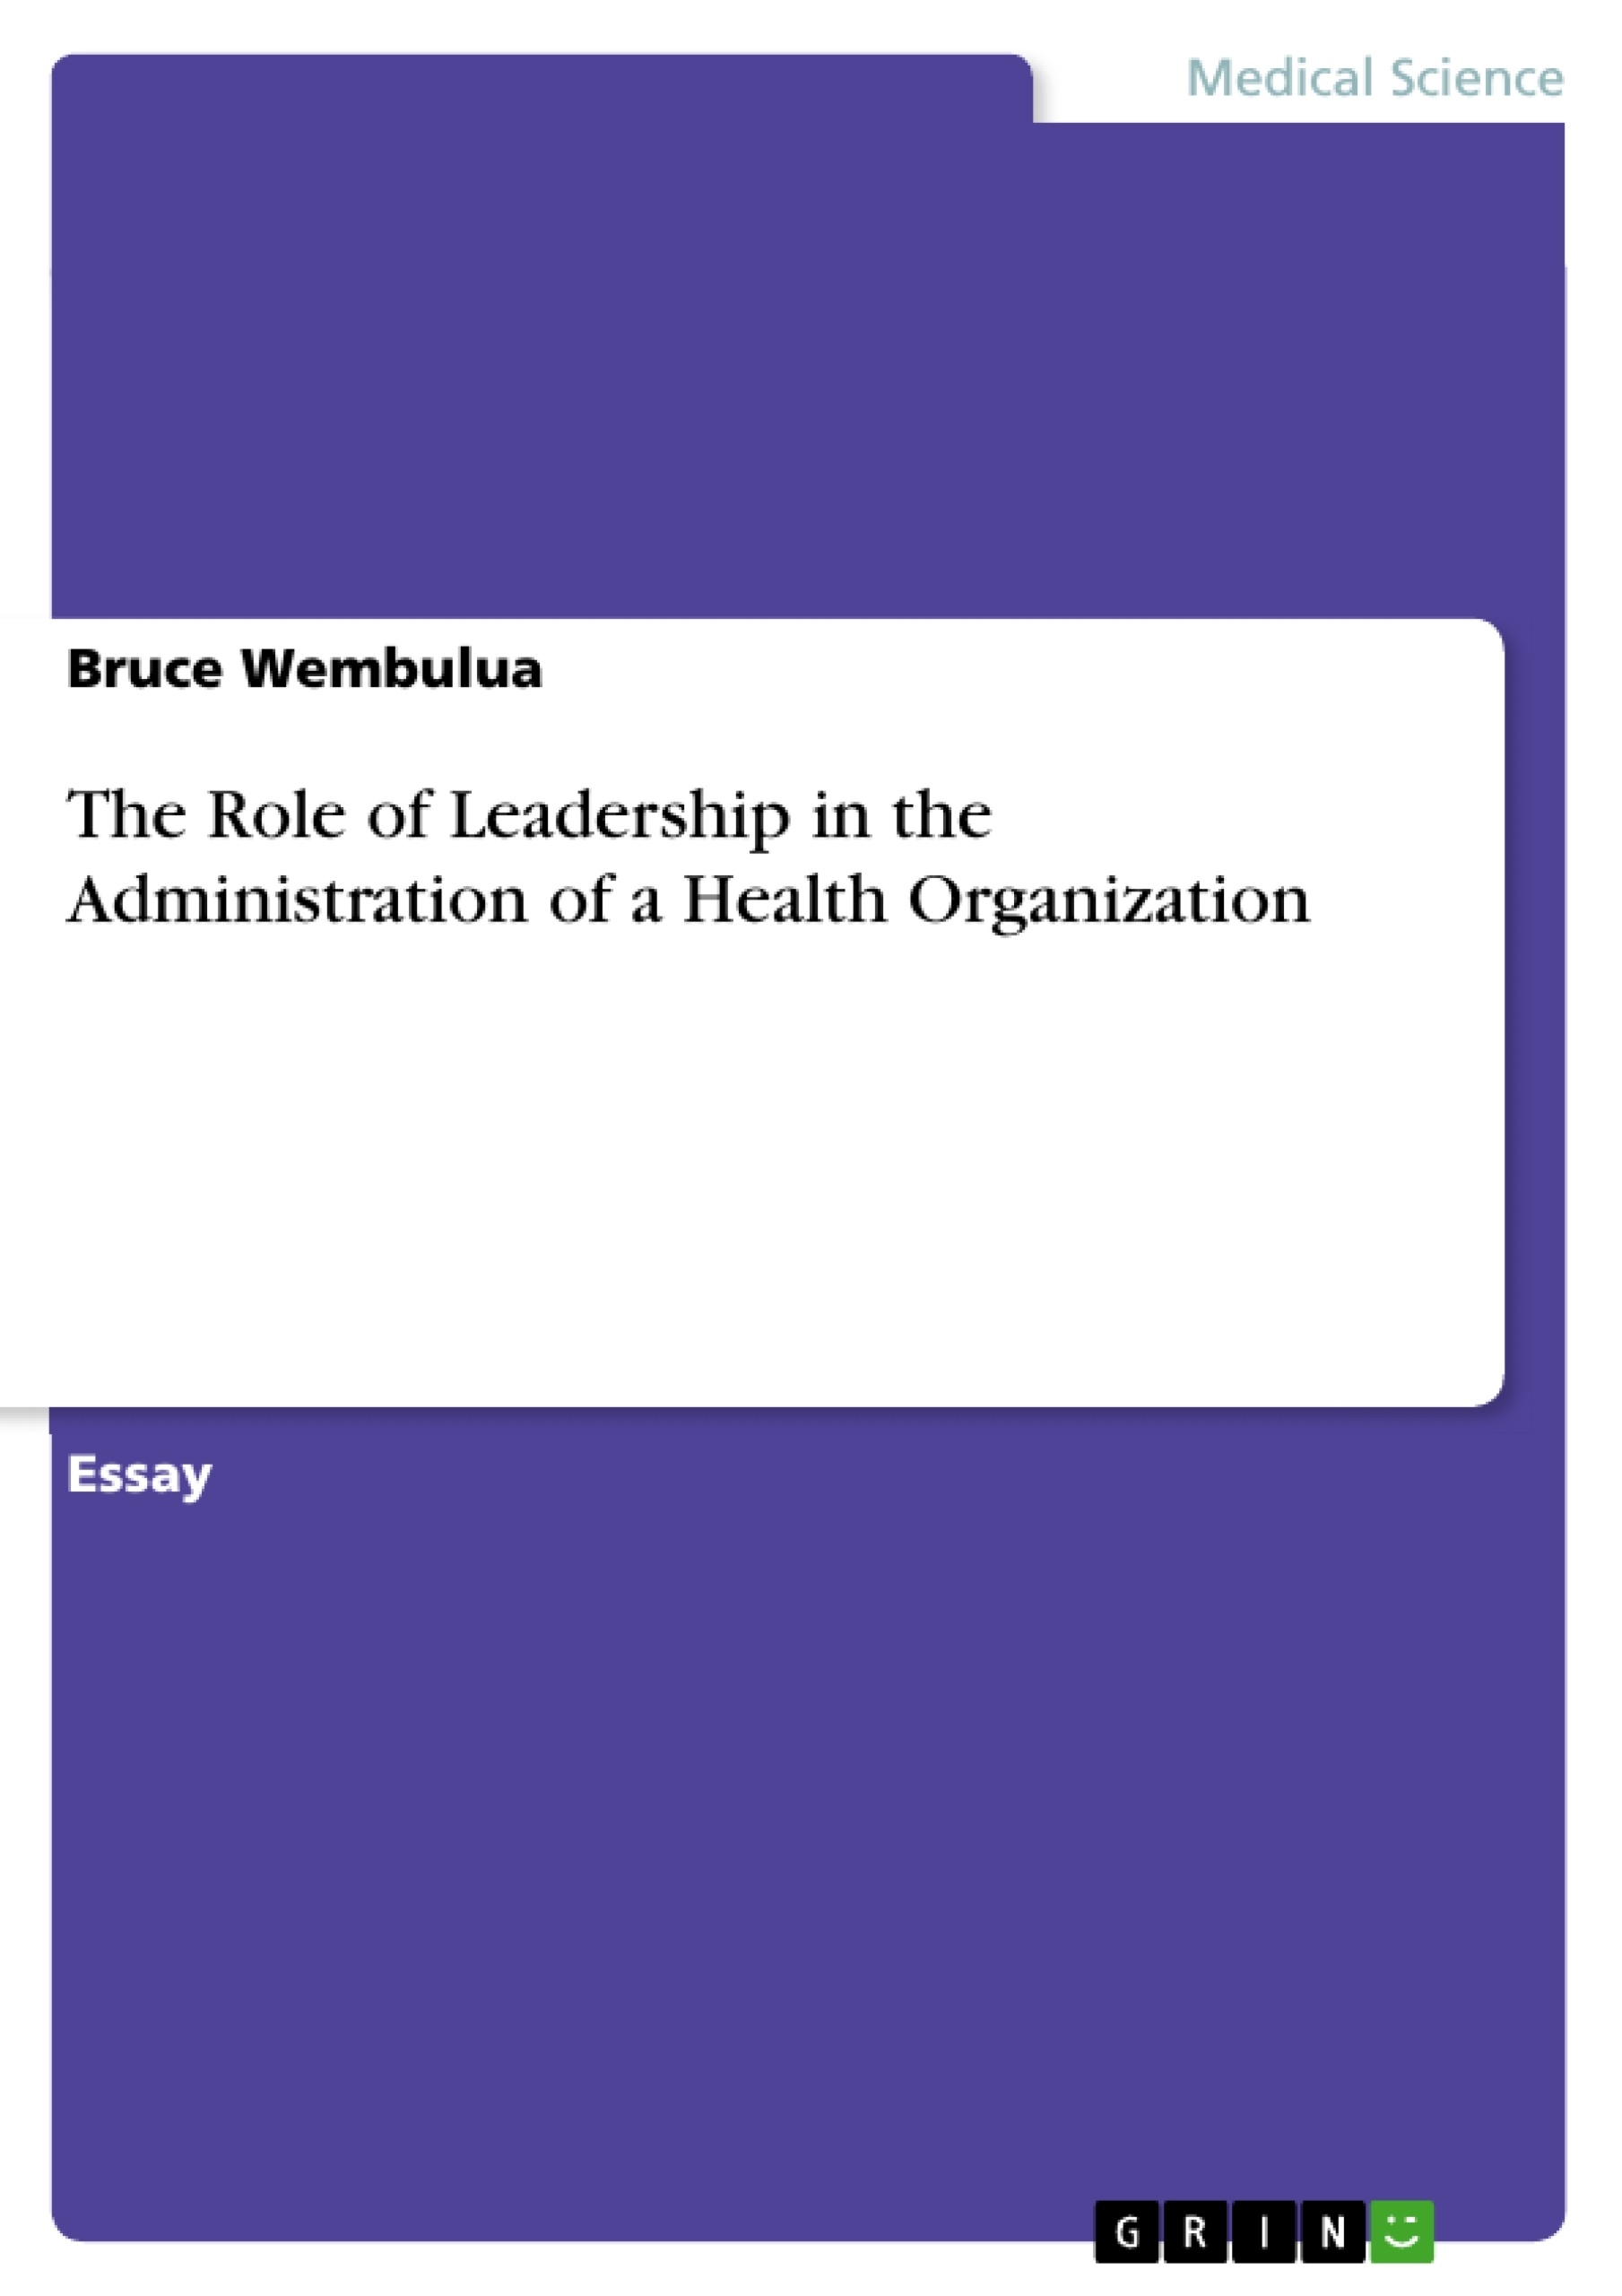 Title: The Role of Leadership in the Administration of a Health Organization